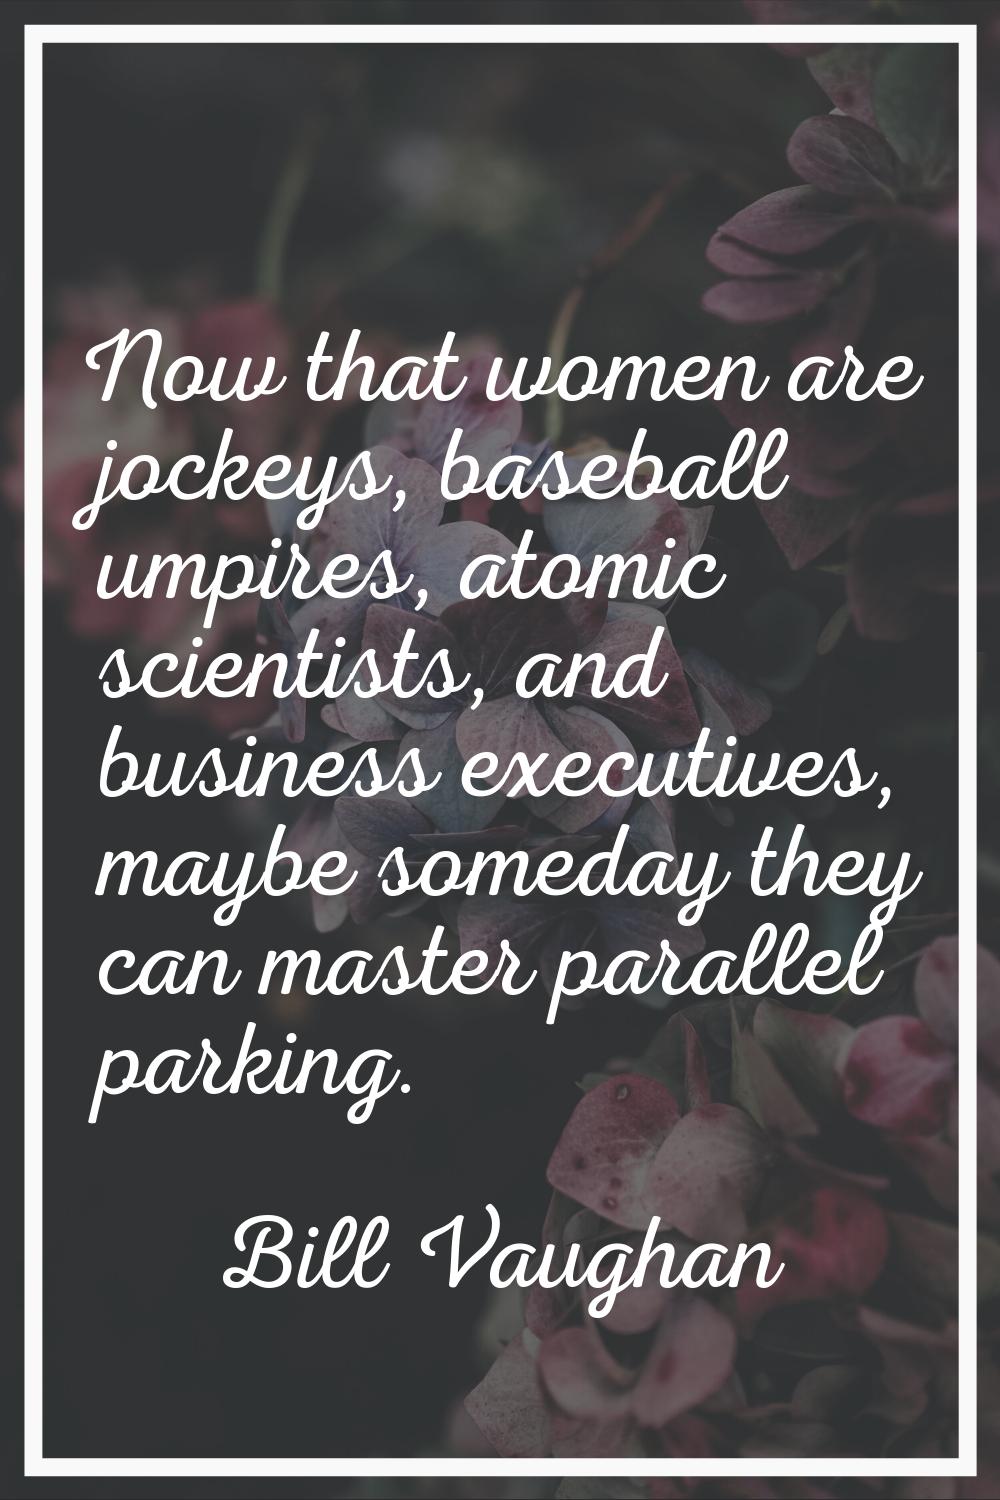 Now that women are jockeys, baseball umpires, atomic scientists, and business executives, maybe som